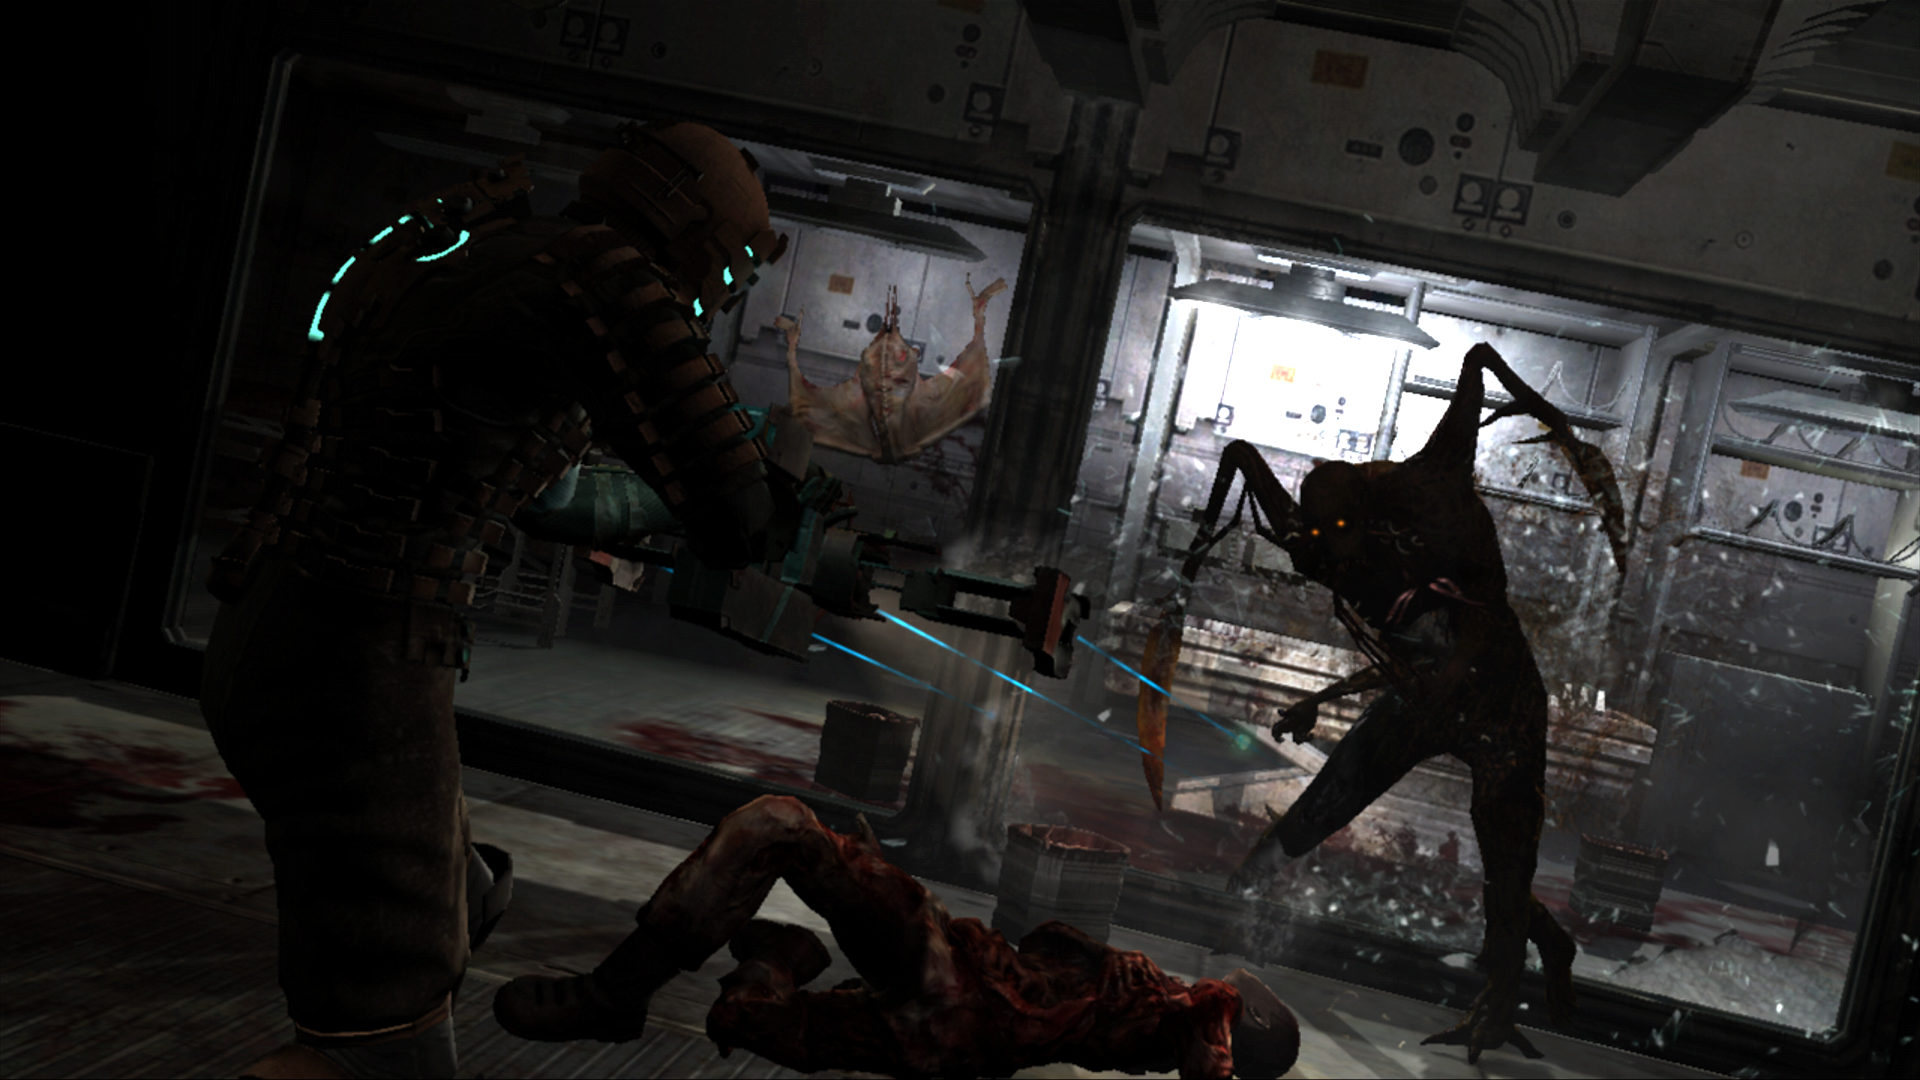 dead space 4 story